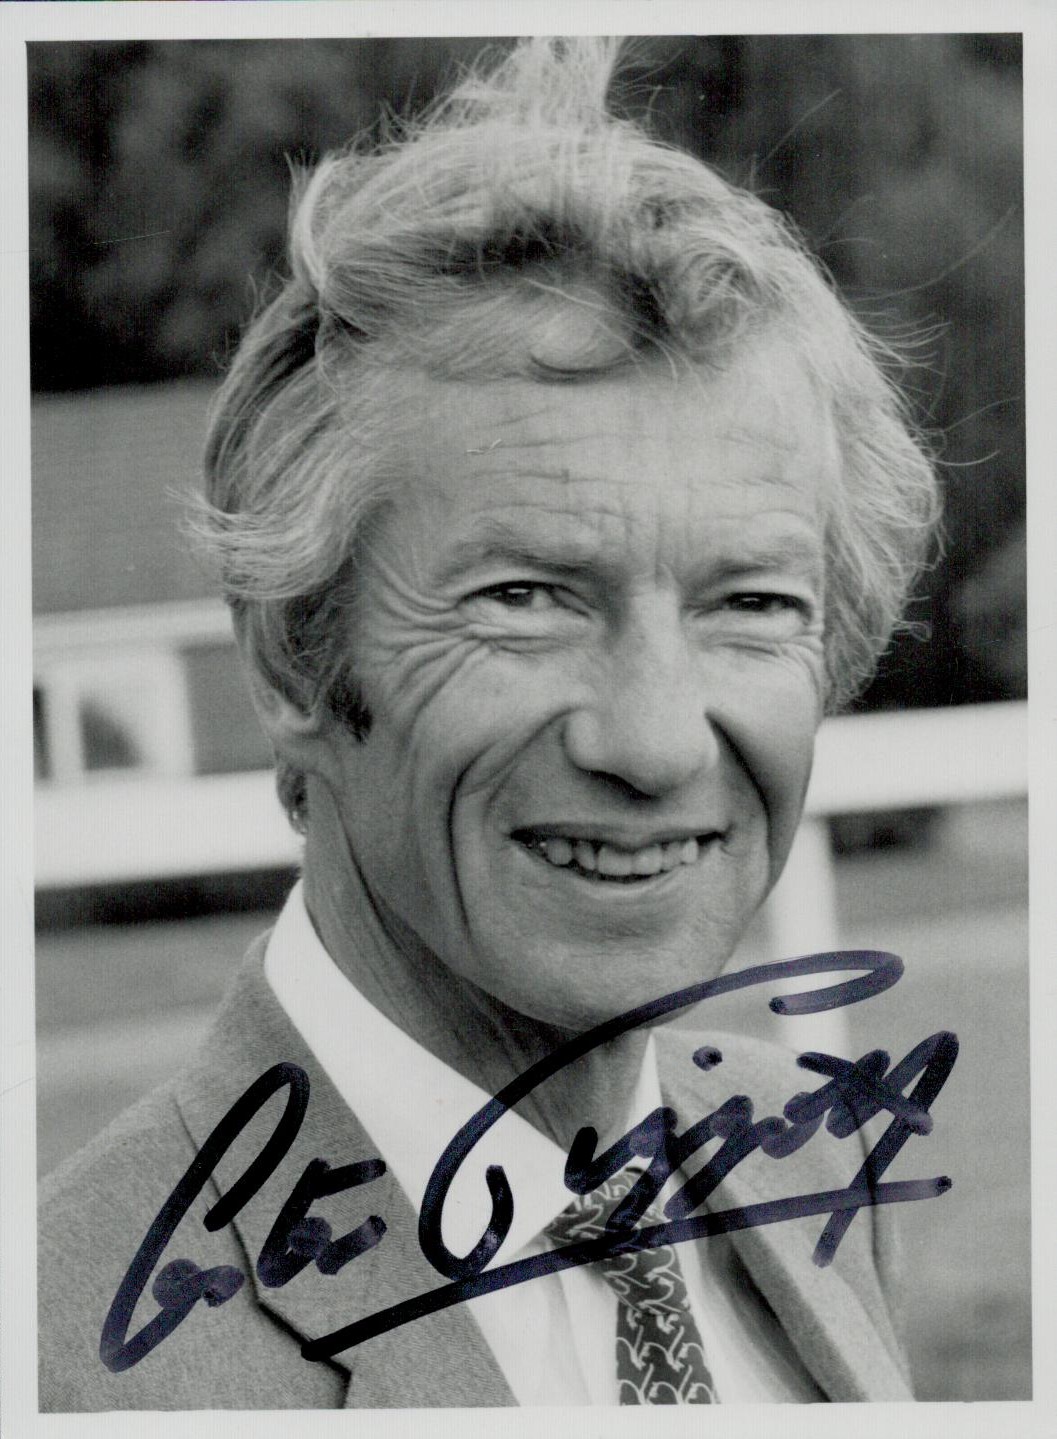 Lester Piggott signed 5x3 inch approx. black and white photo. Good Condition. All autographs come